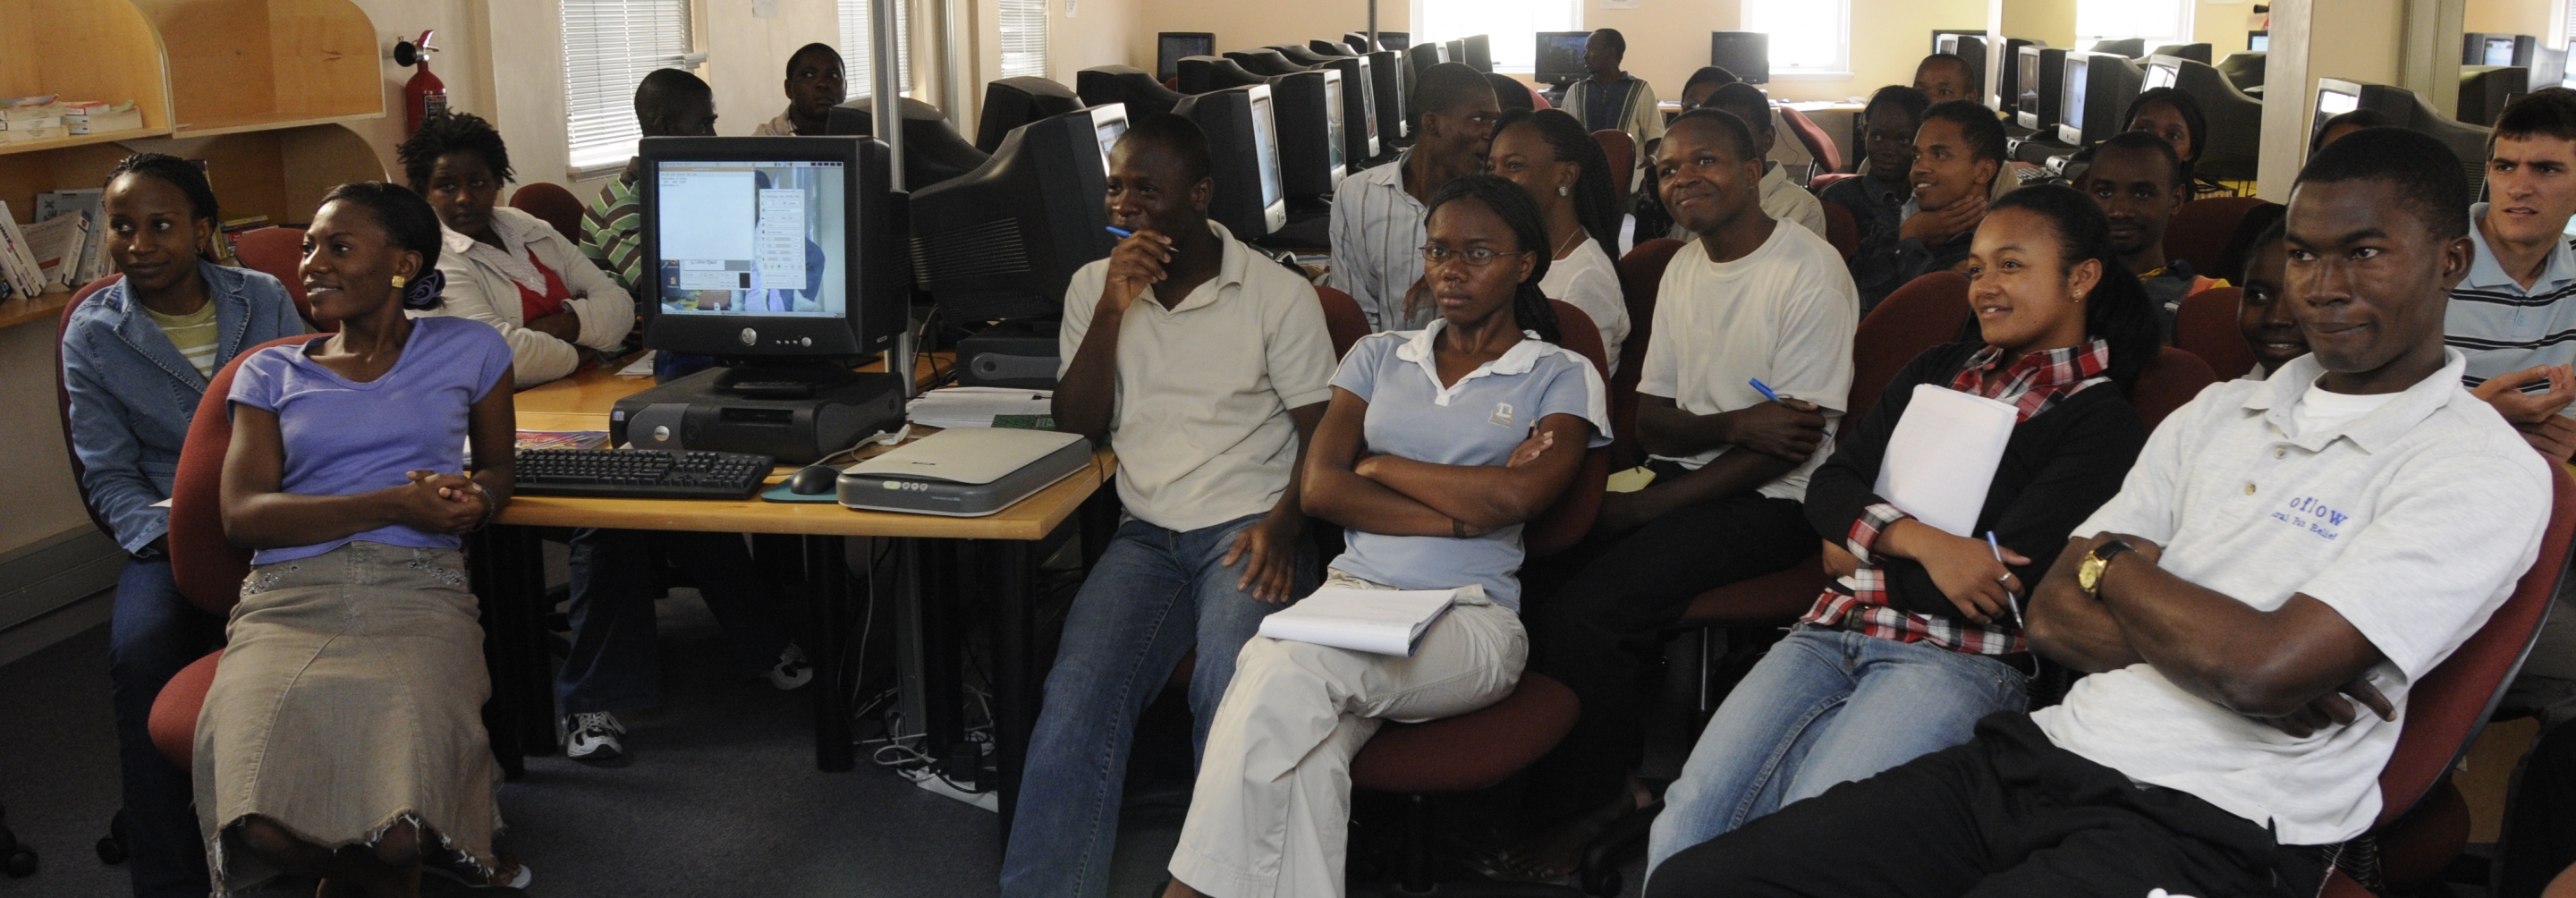 Group of African students in a computer lab